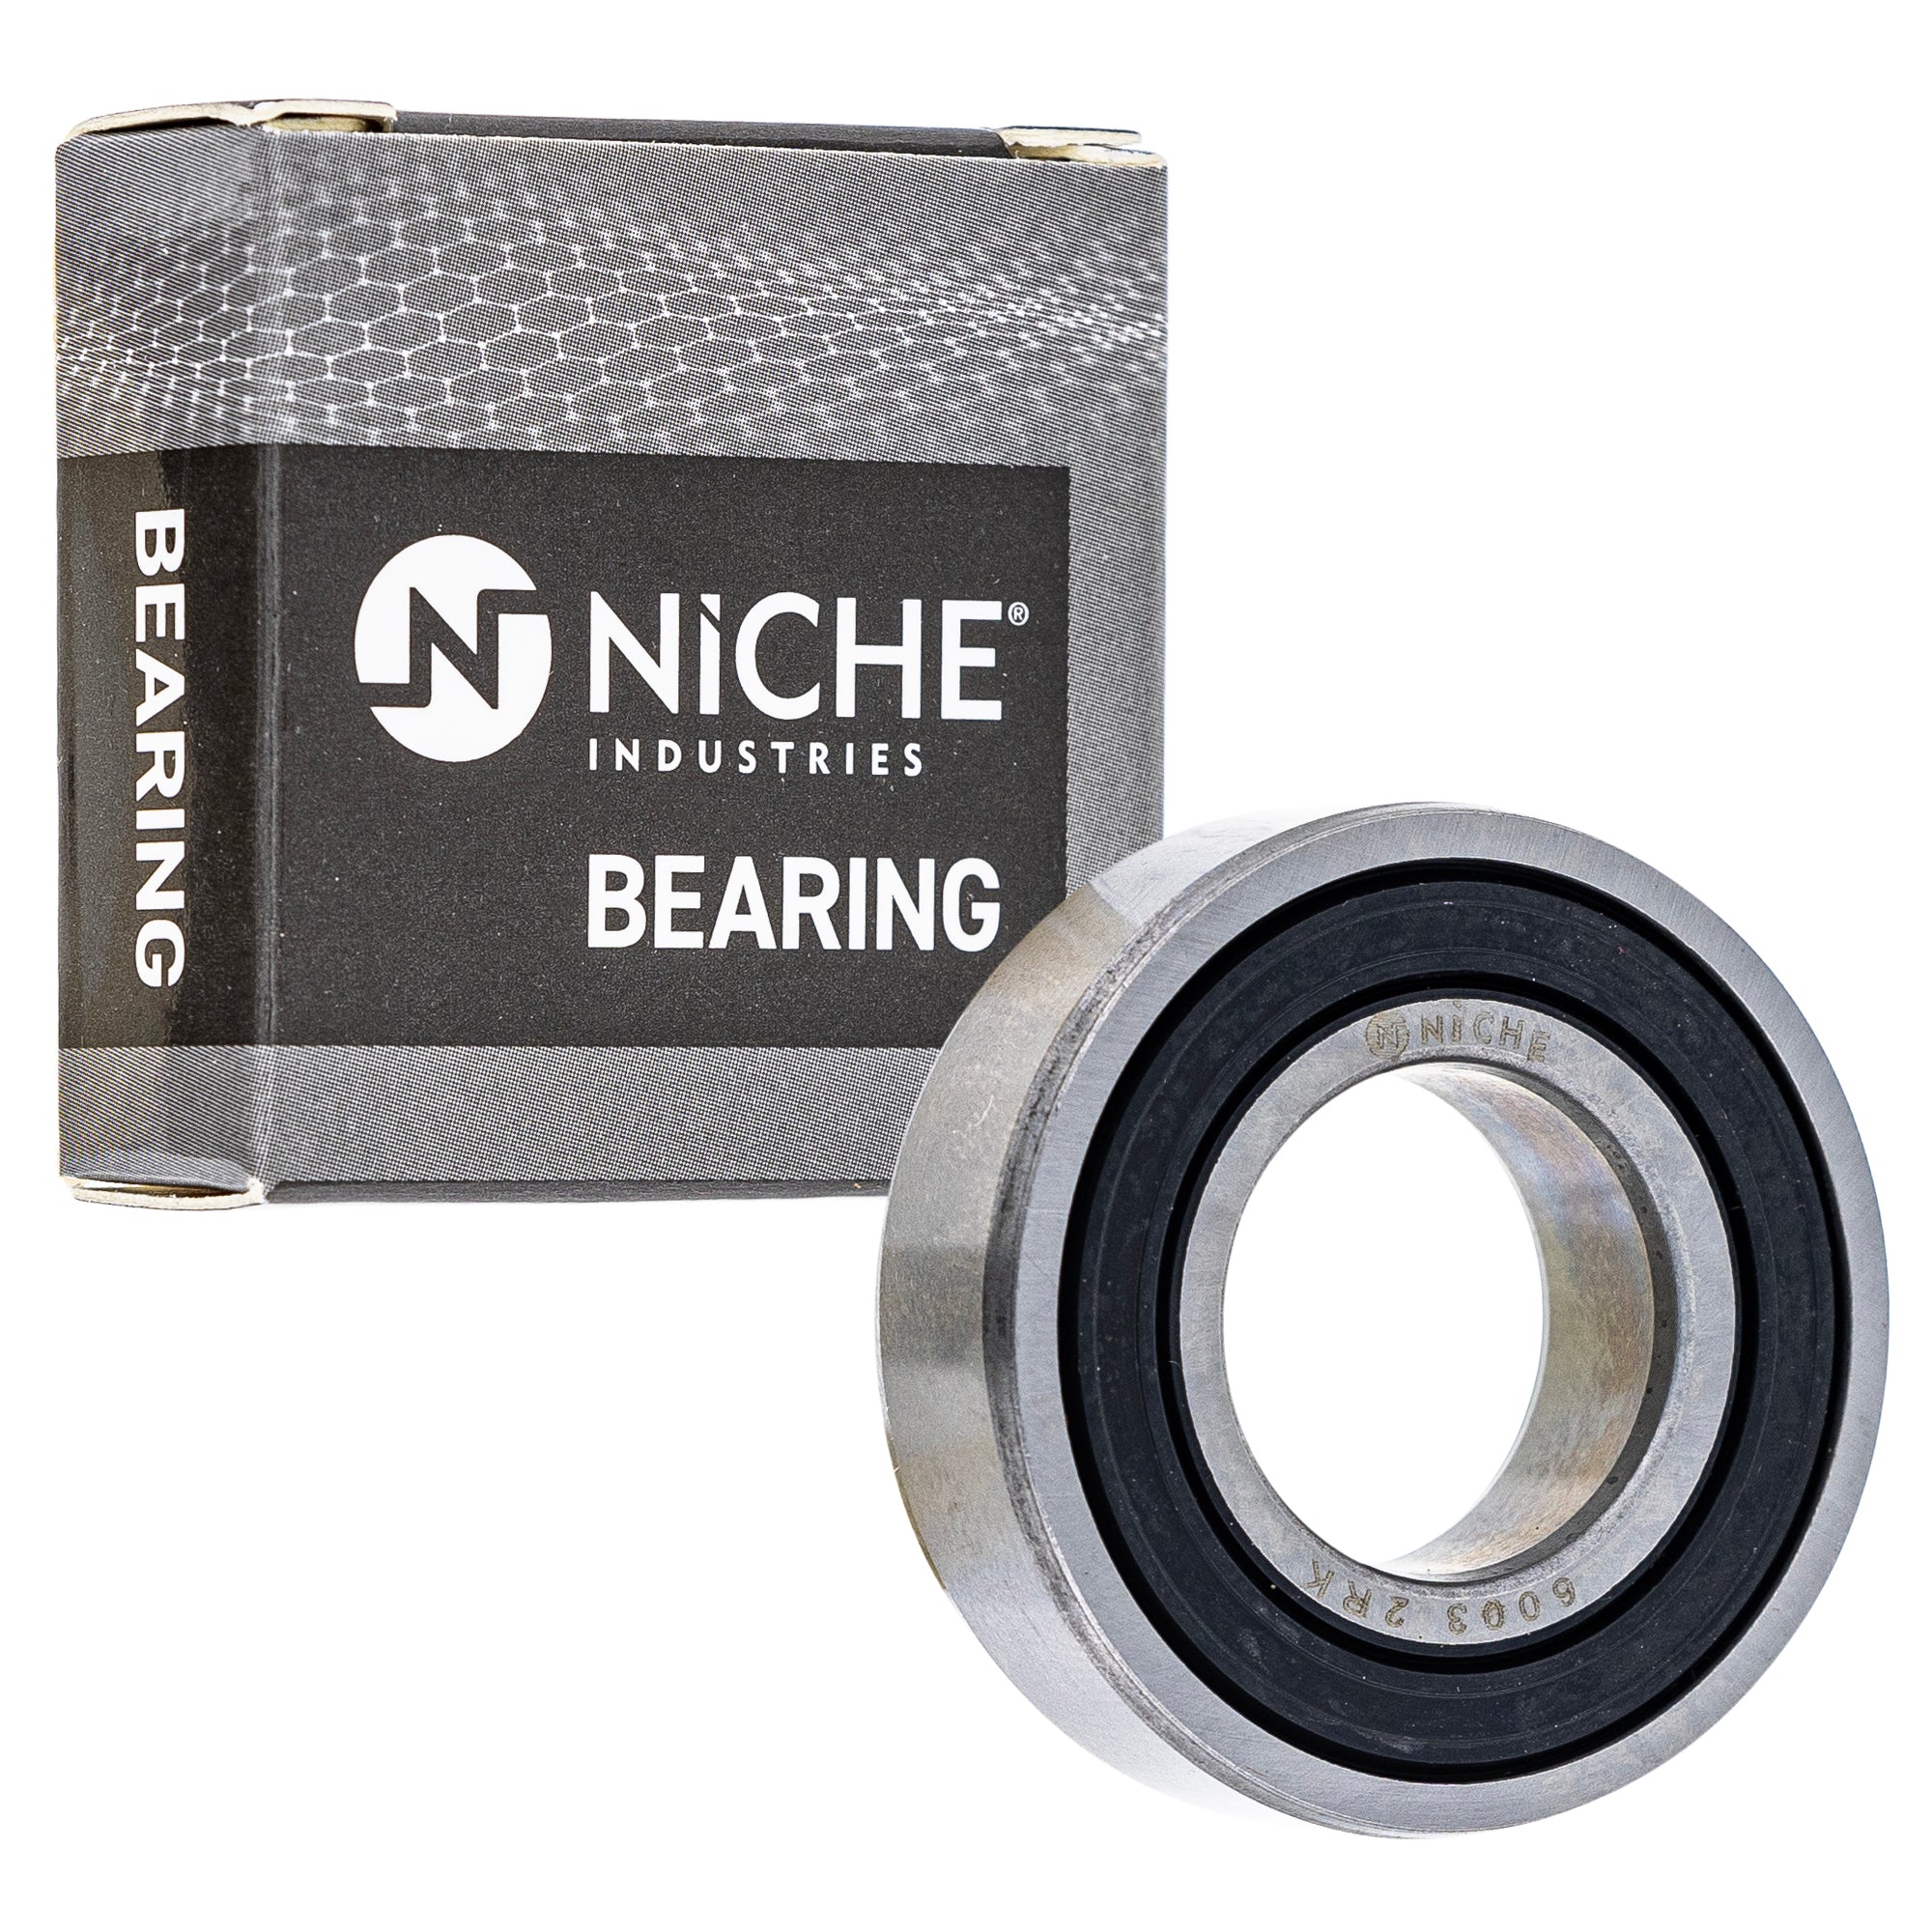 NICHE 519-CBB2325R Bearing & Seal Kit 2-Pack for zOTHER Arctic Cat